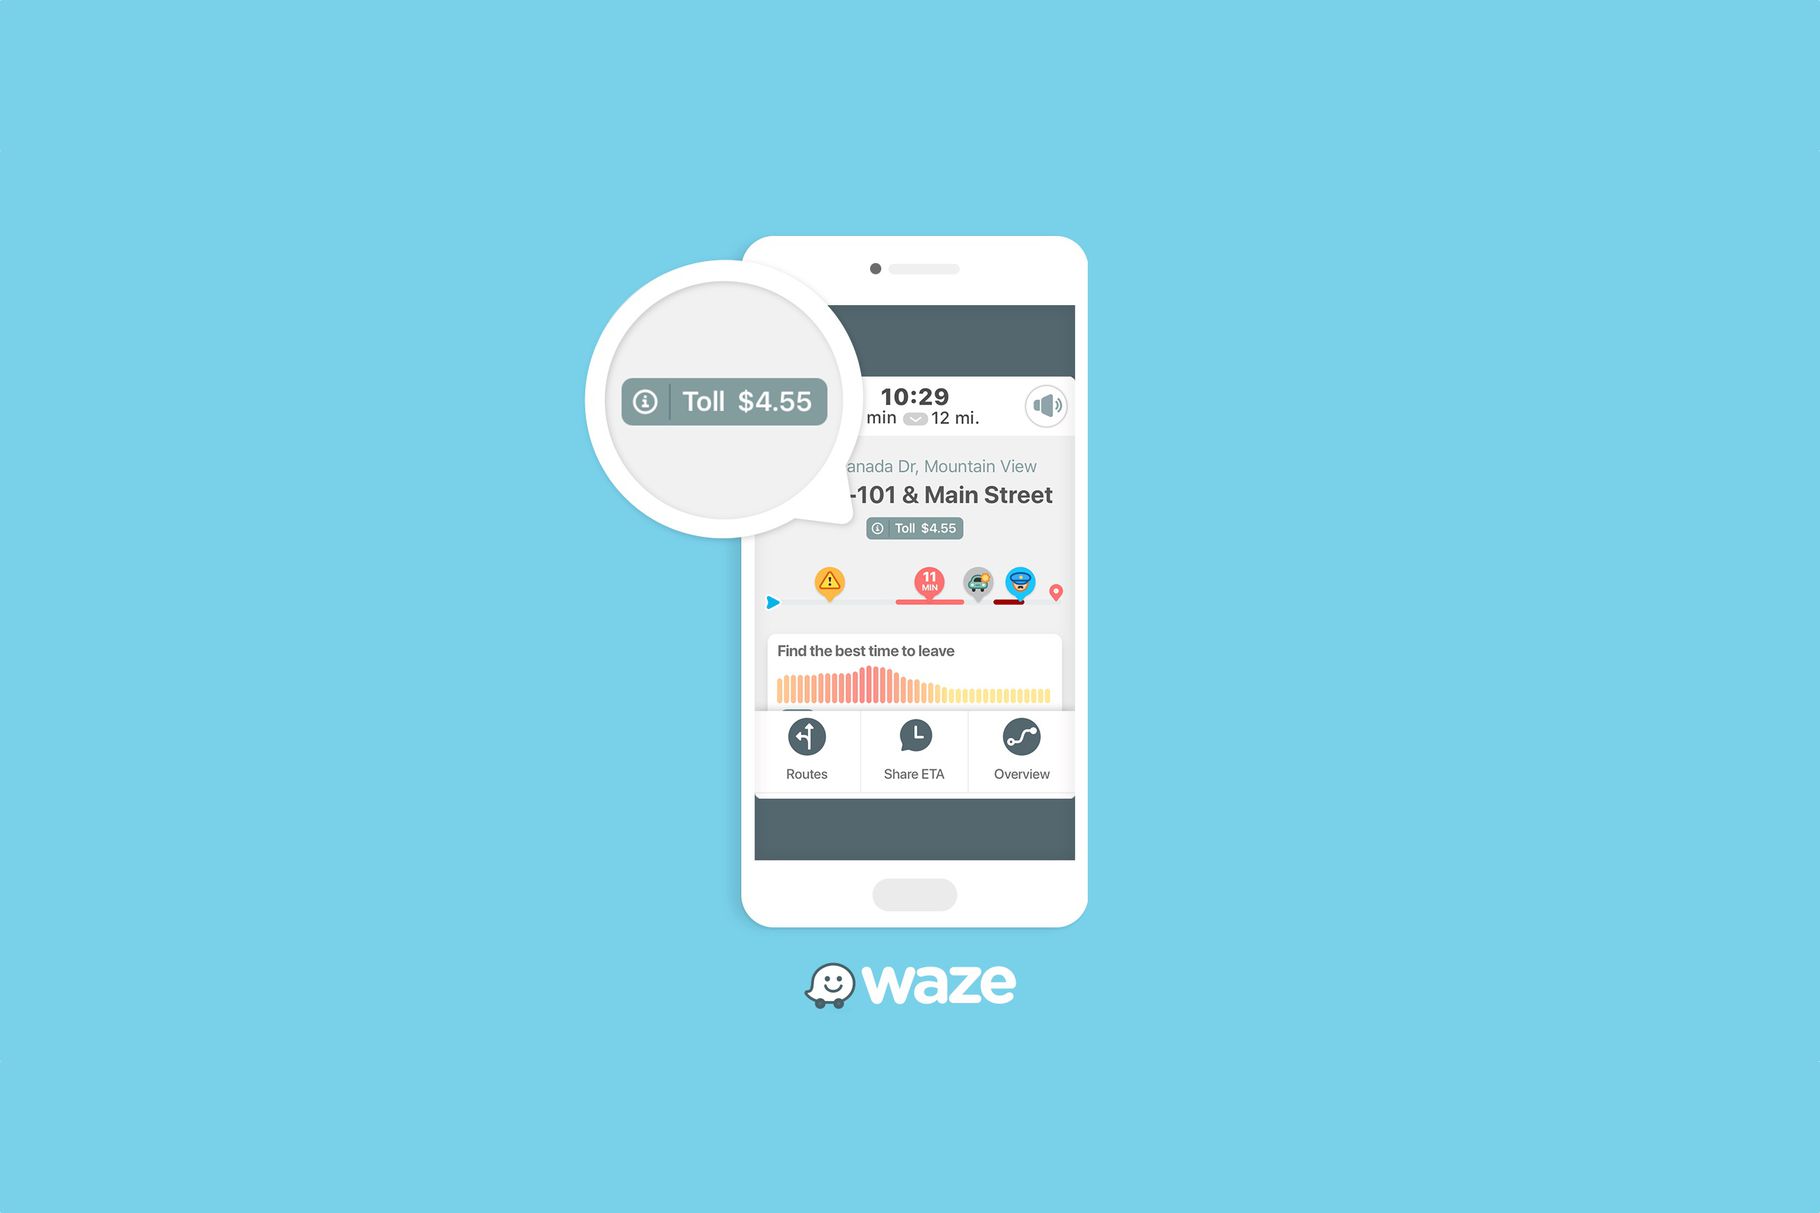 Waze can now show toll prices along your route